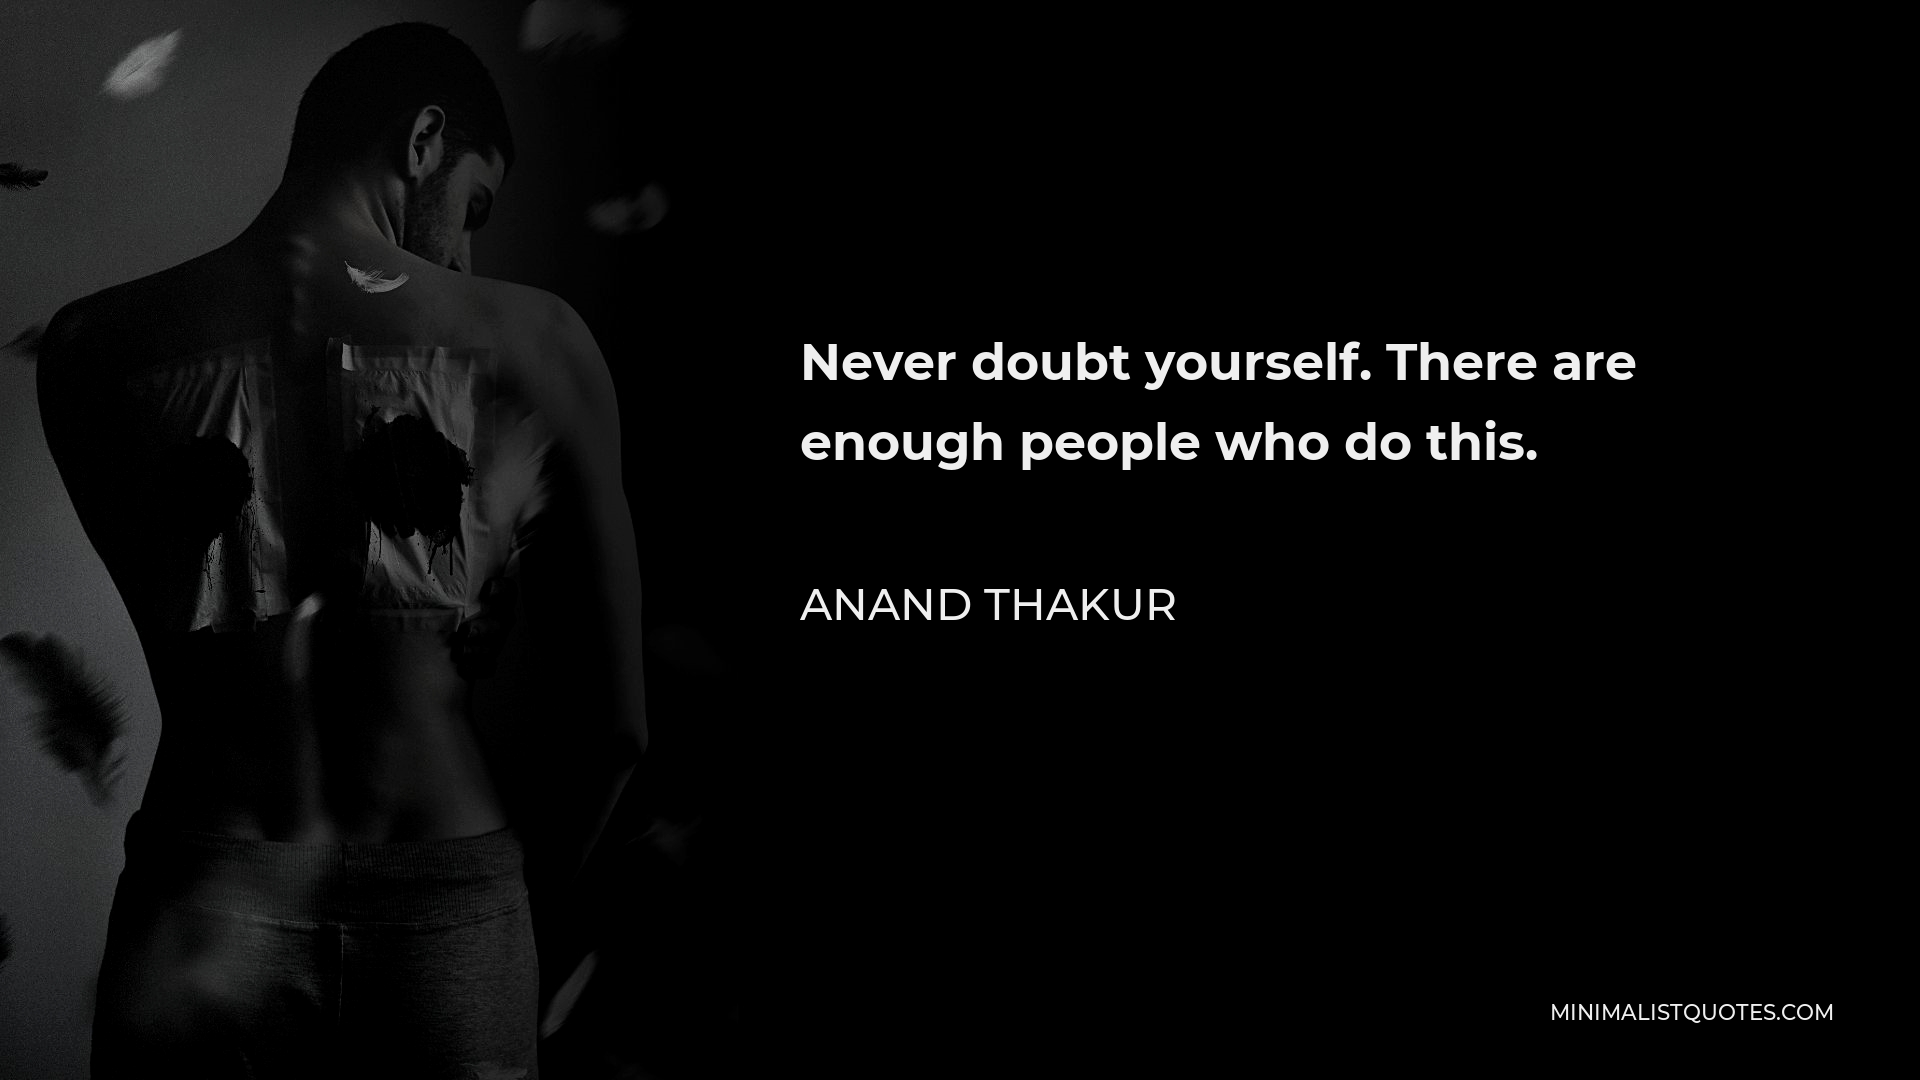 Anand Thakur Quote - Never doubt yourself. There are enough people who do this.